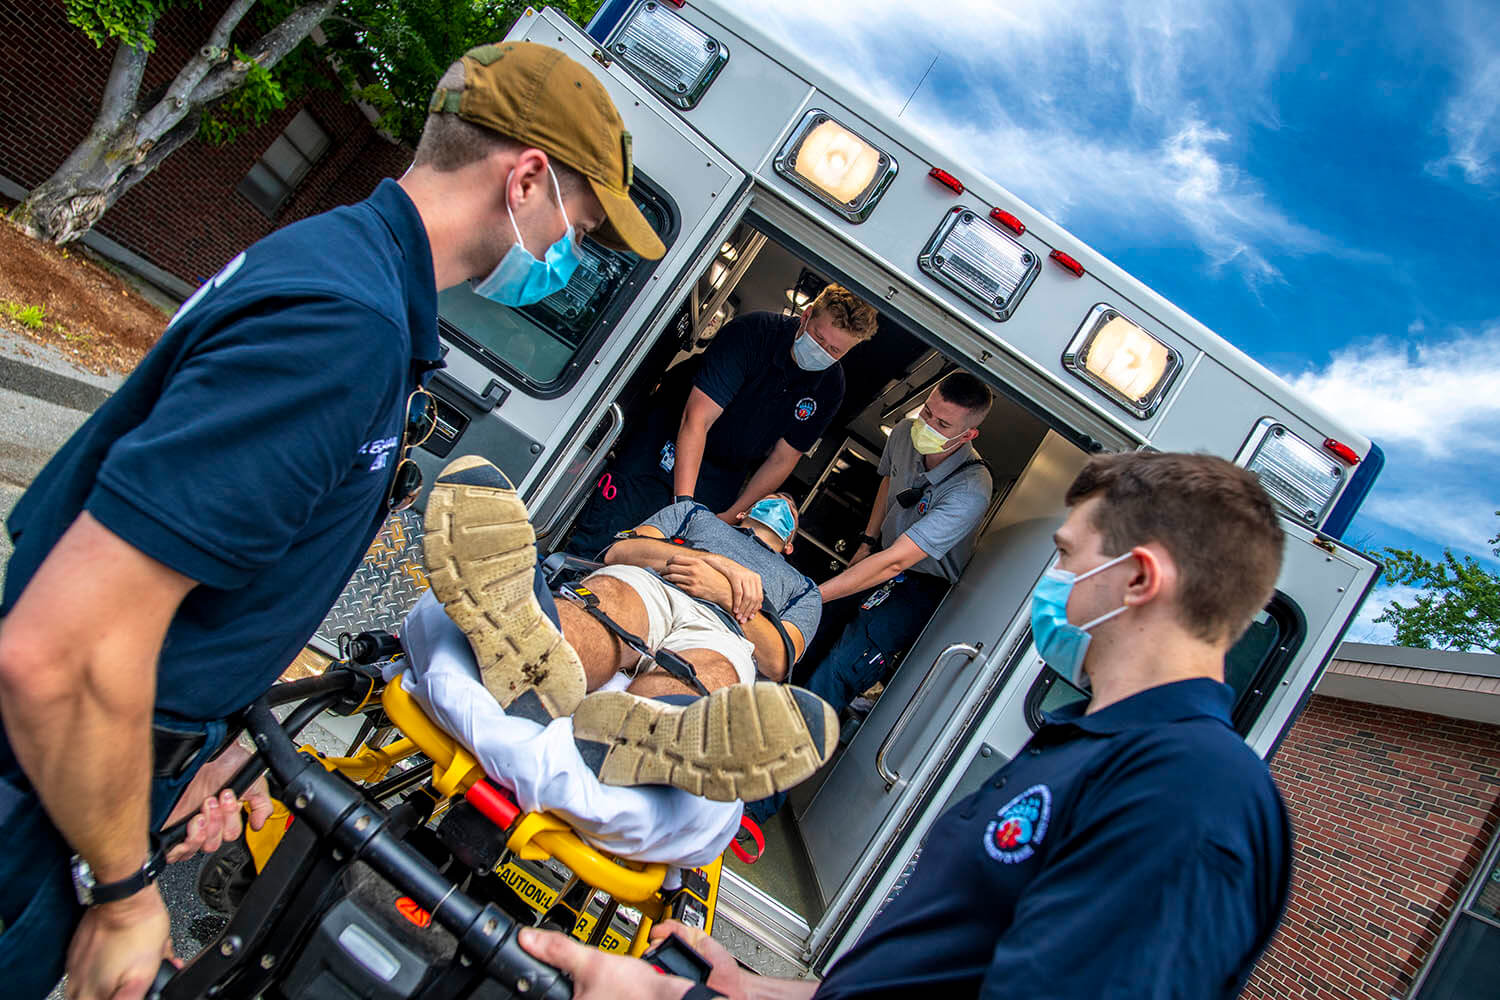 A patient is loaded into an ambulance during a simulation